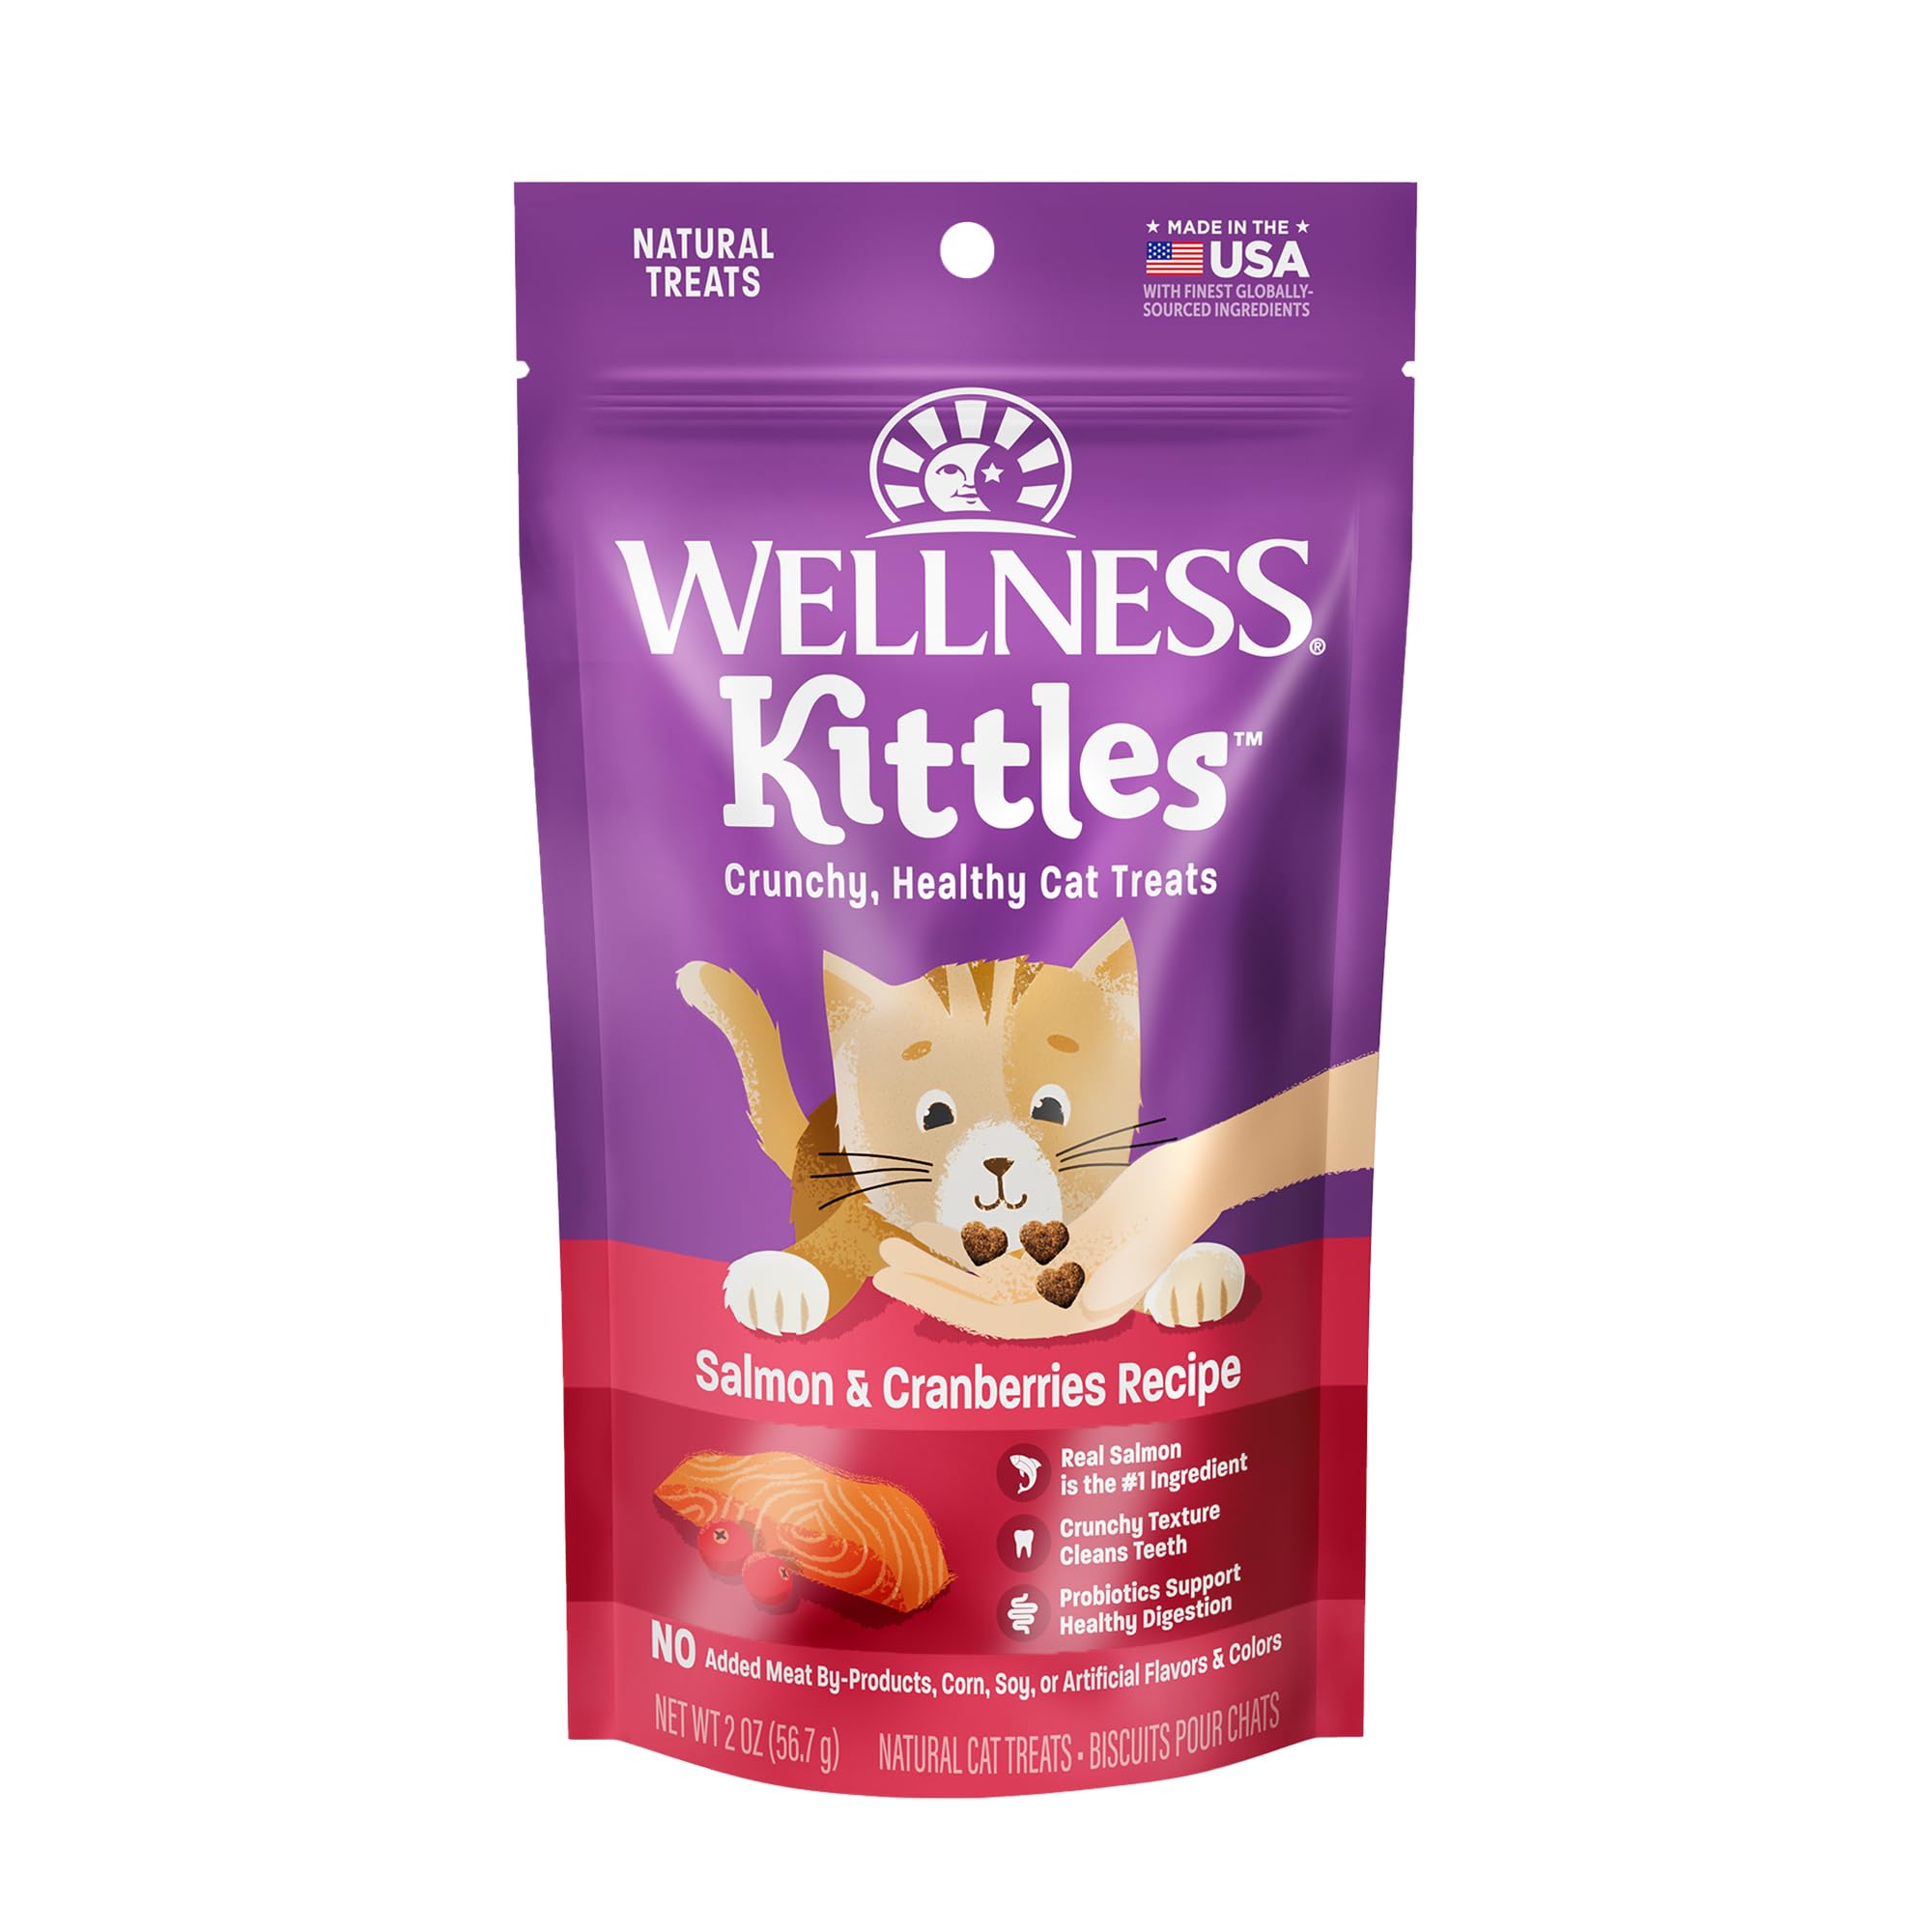 2-Oz Wellness Kittles Grain-Free Salmon & Cranberries Recipe Crunchy Cat Treats $1.35 w/ S&S + Free Shipping w/ Prime or on $35+